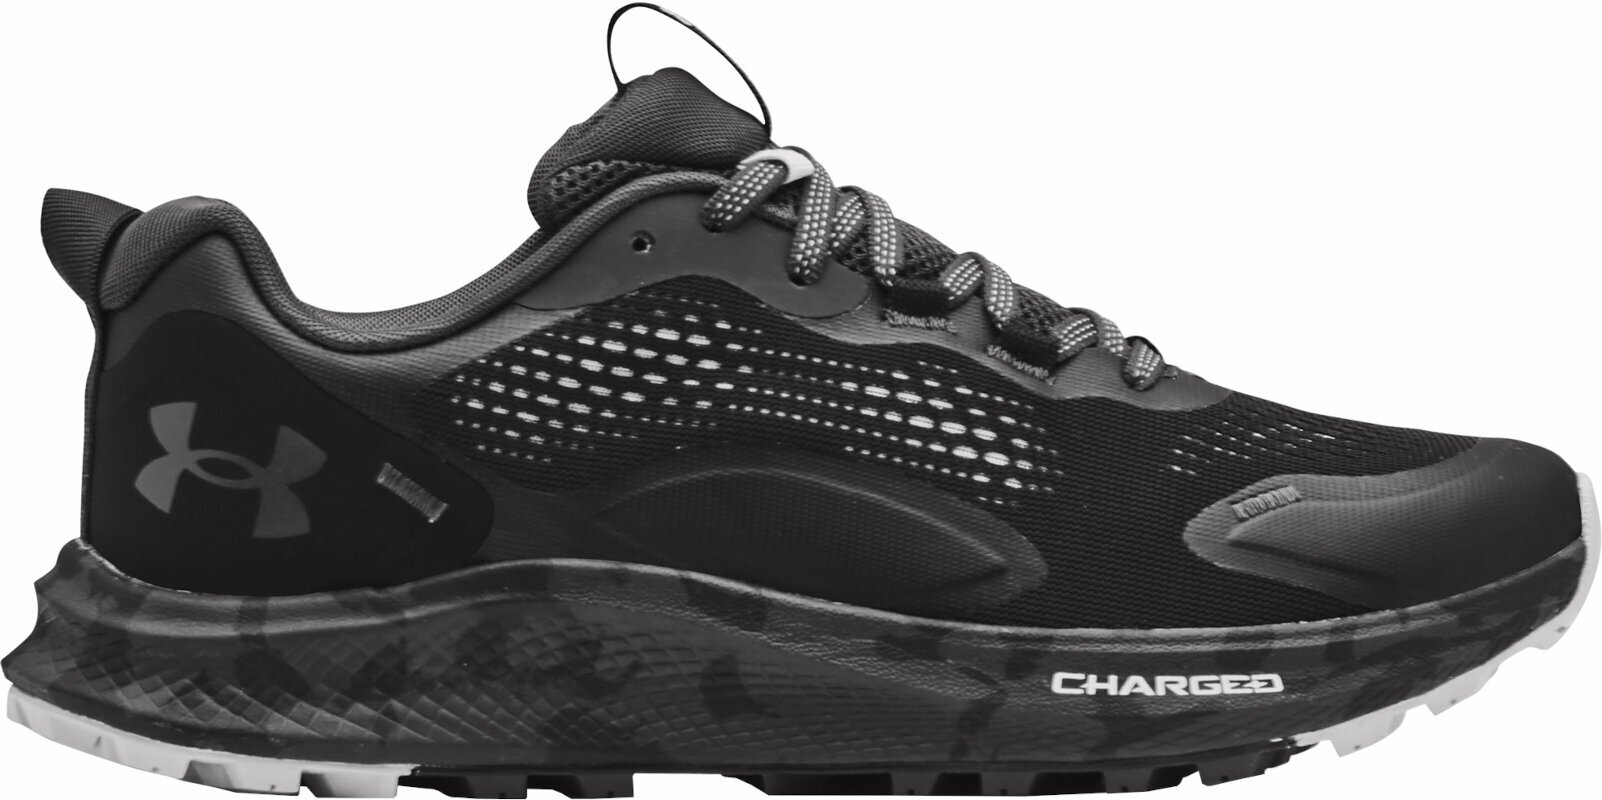 Chaussures de trail running
 Under Armour Women's UA Charged Bandit Trail 2 Running Shoes Black/Jet Gray 37,5 Chaussures de trail running